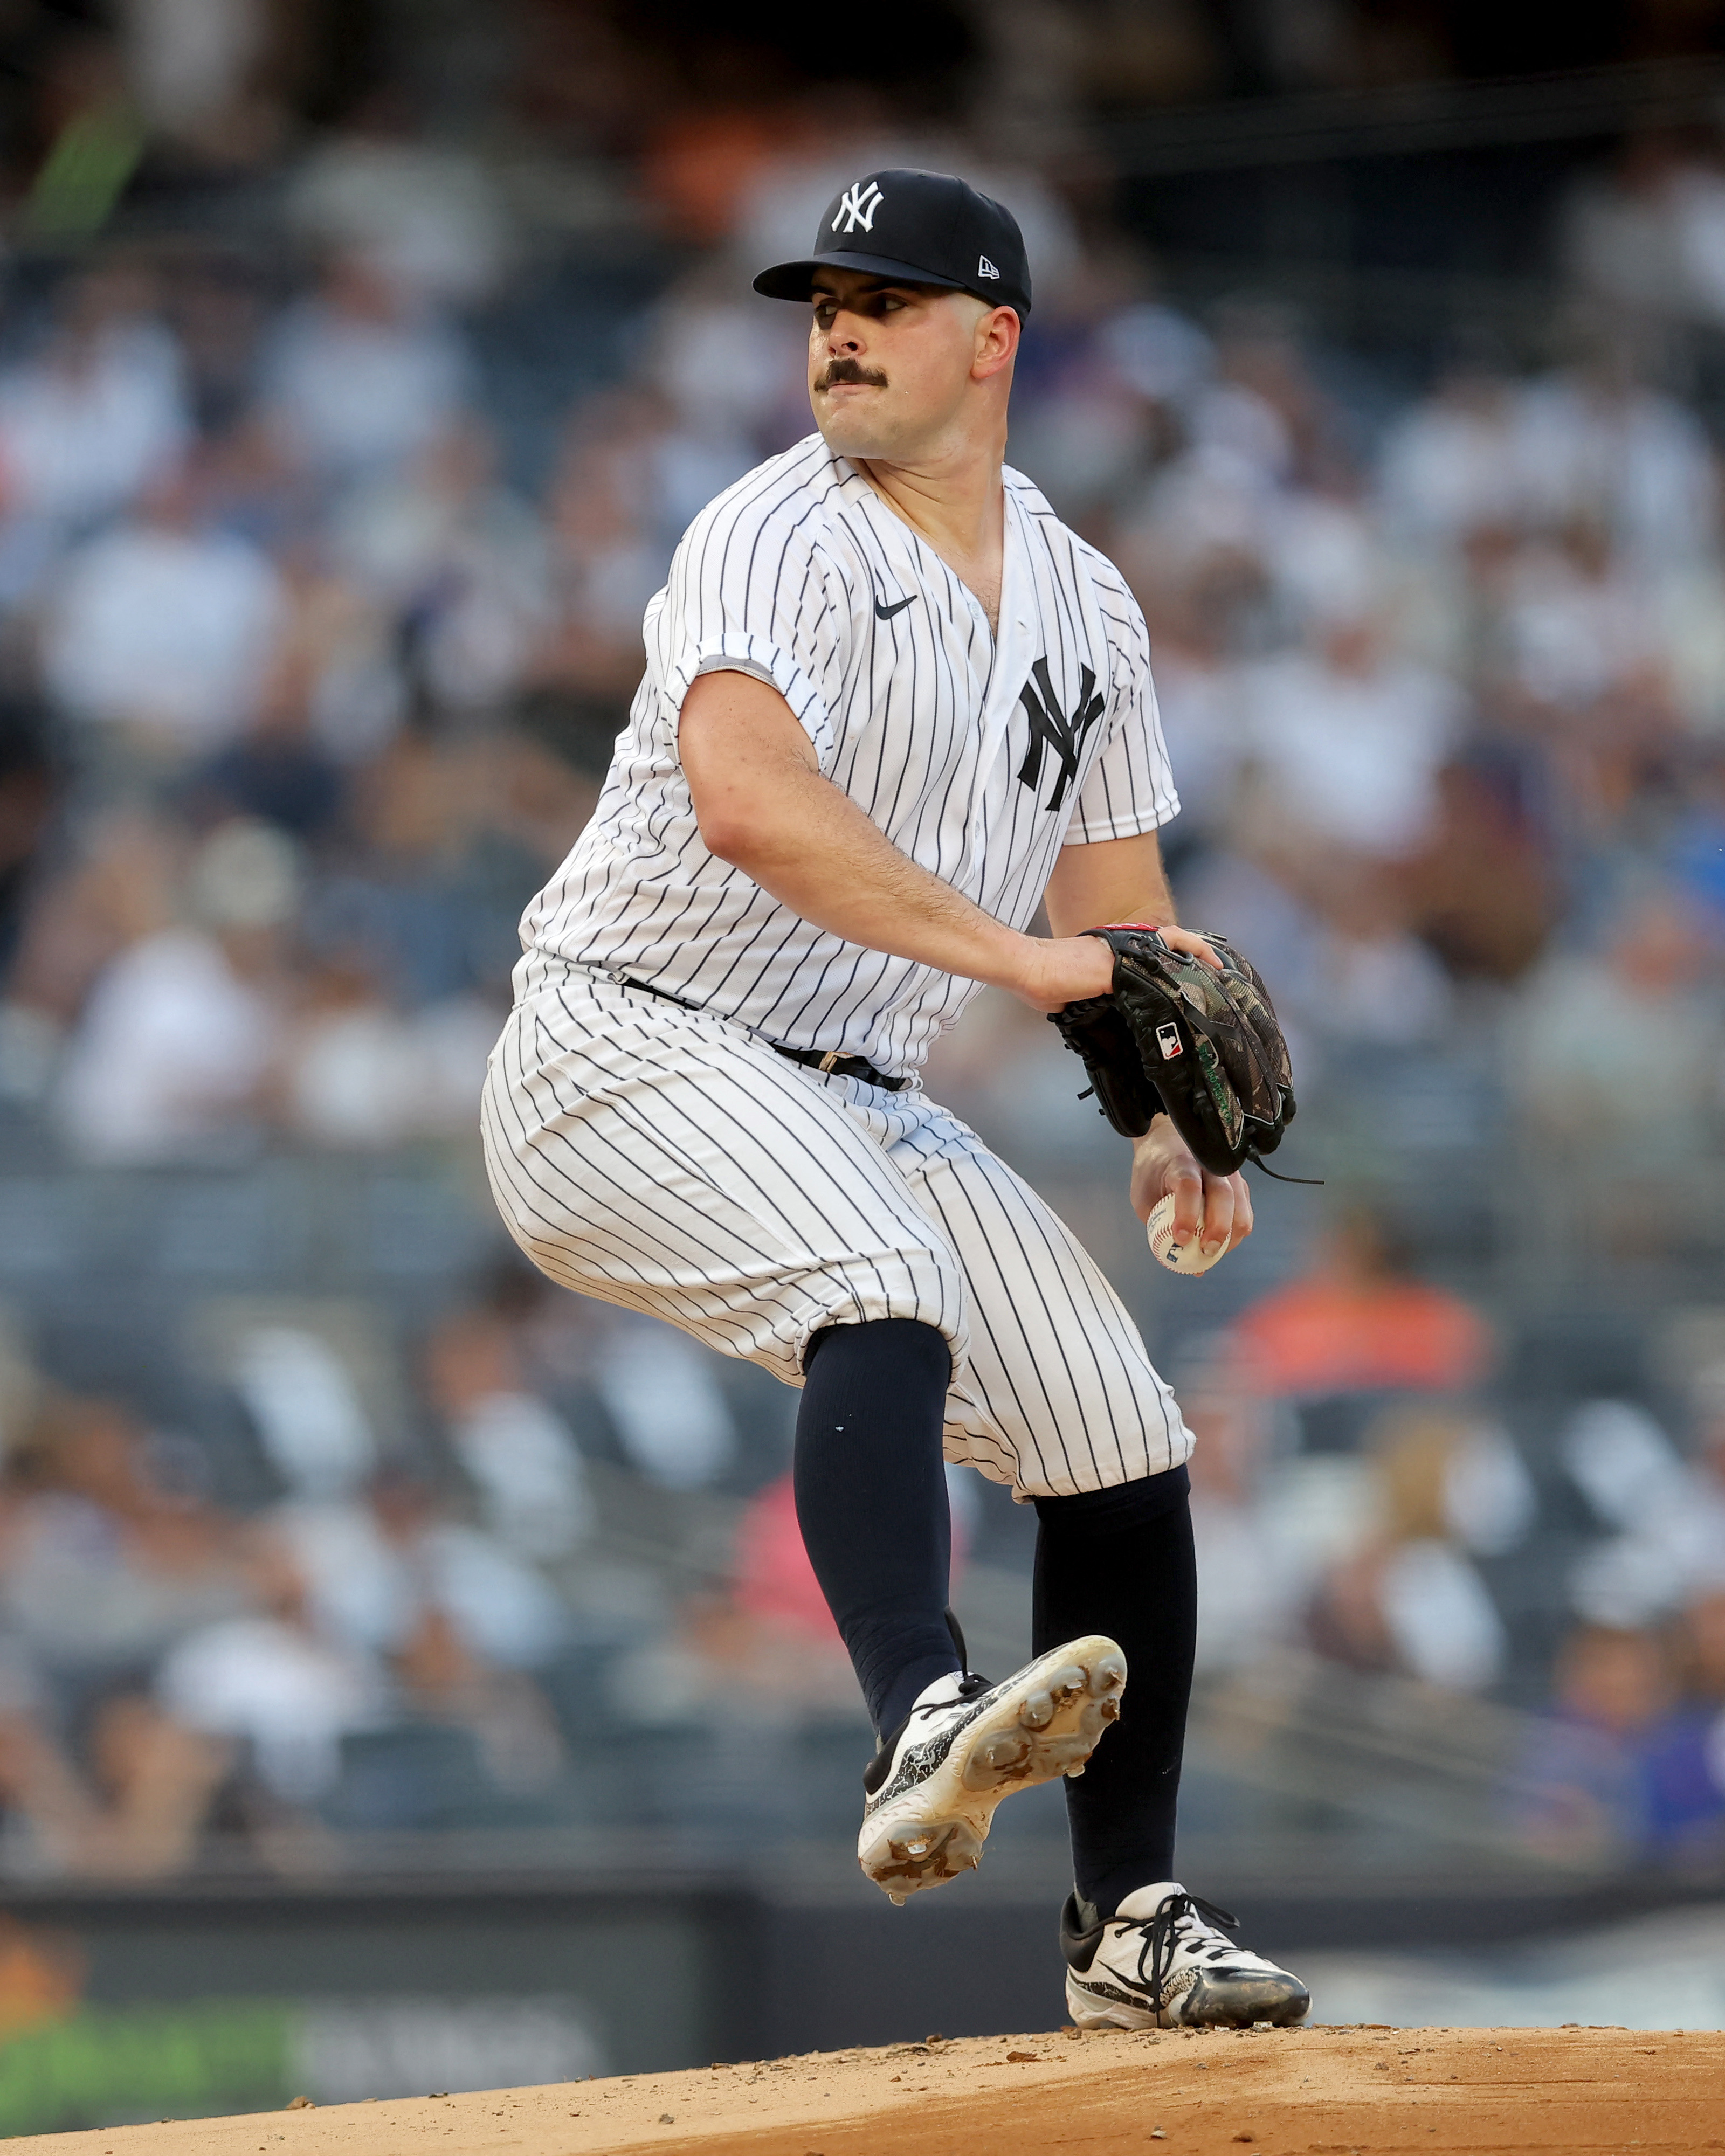 Carlos Rodon outpitches Jose Quintana as Yankees beat Mets for